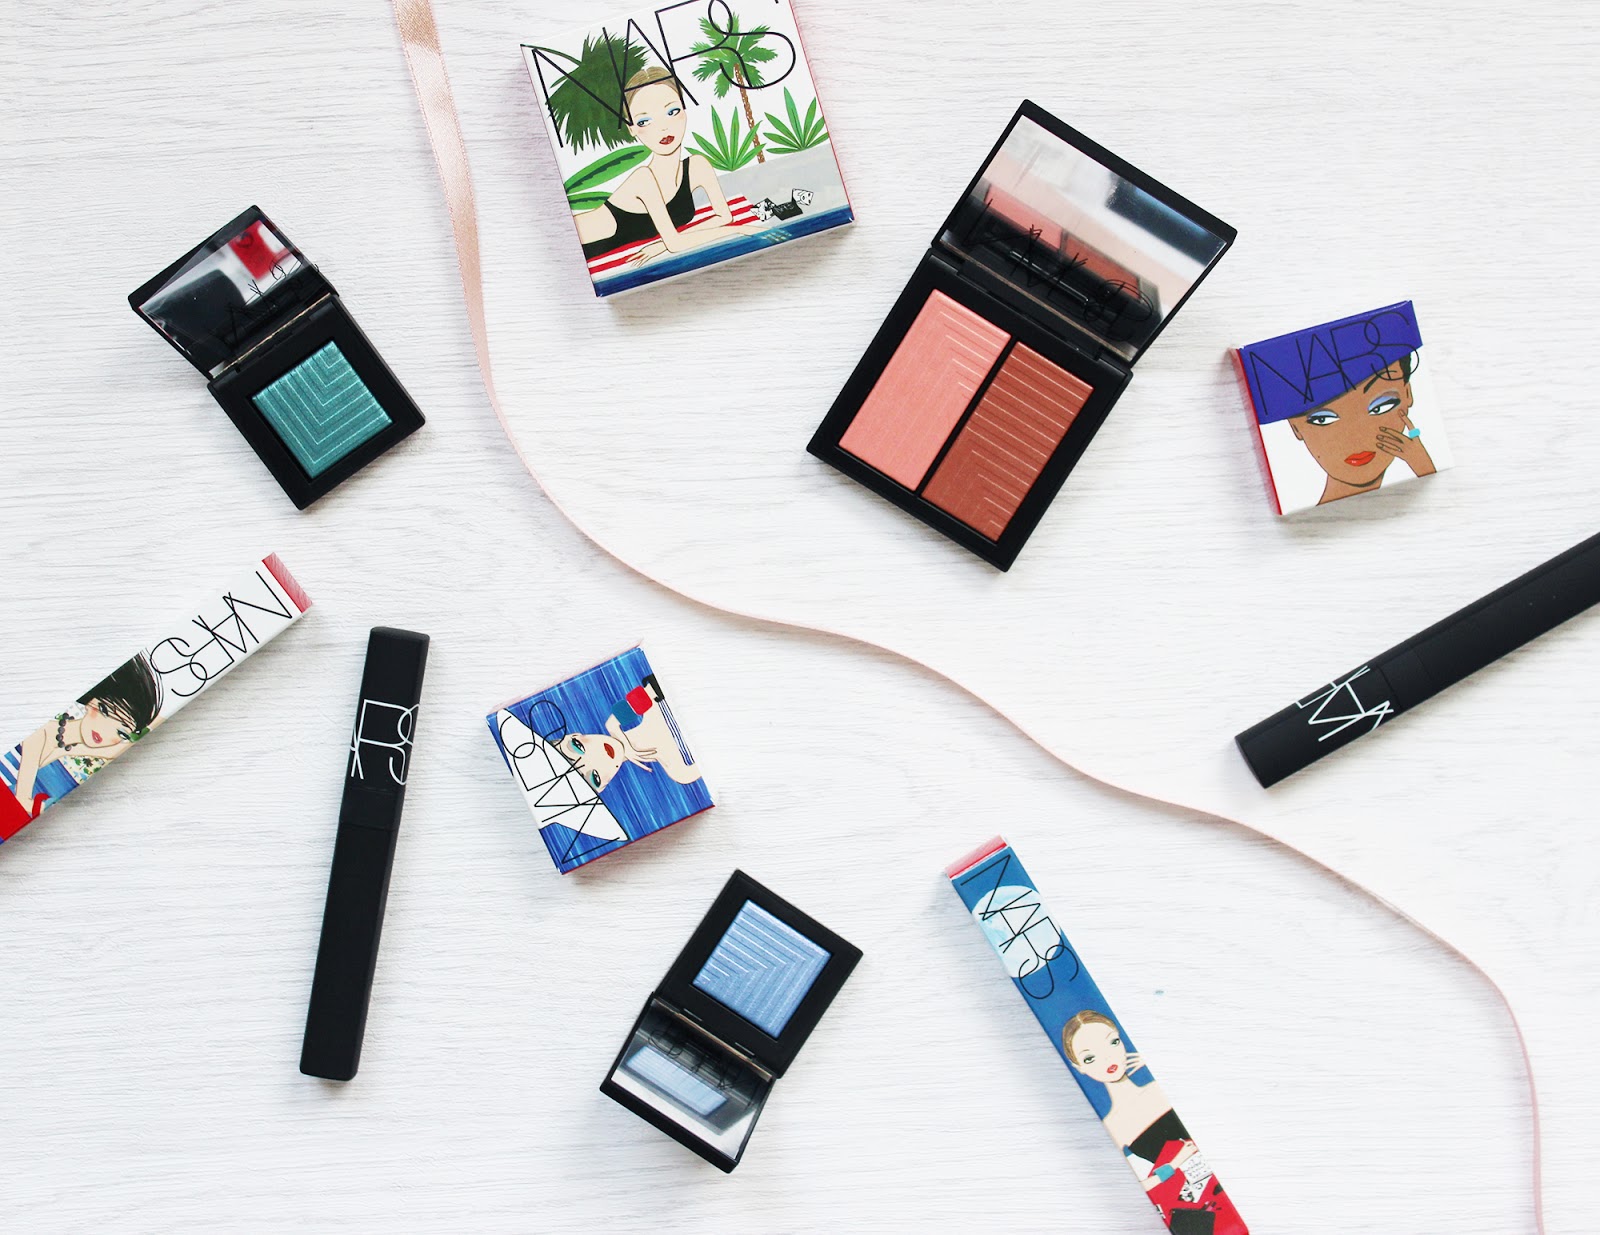 NARS Under Cover summer collection review and swatches on pale skin